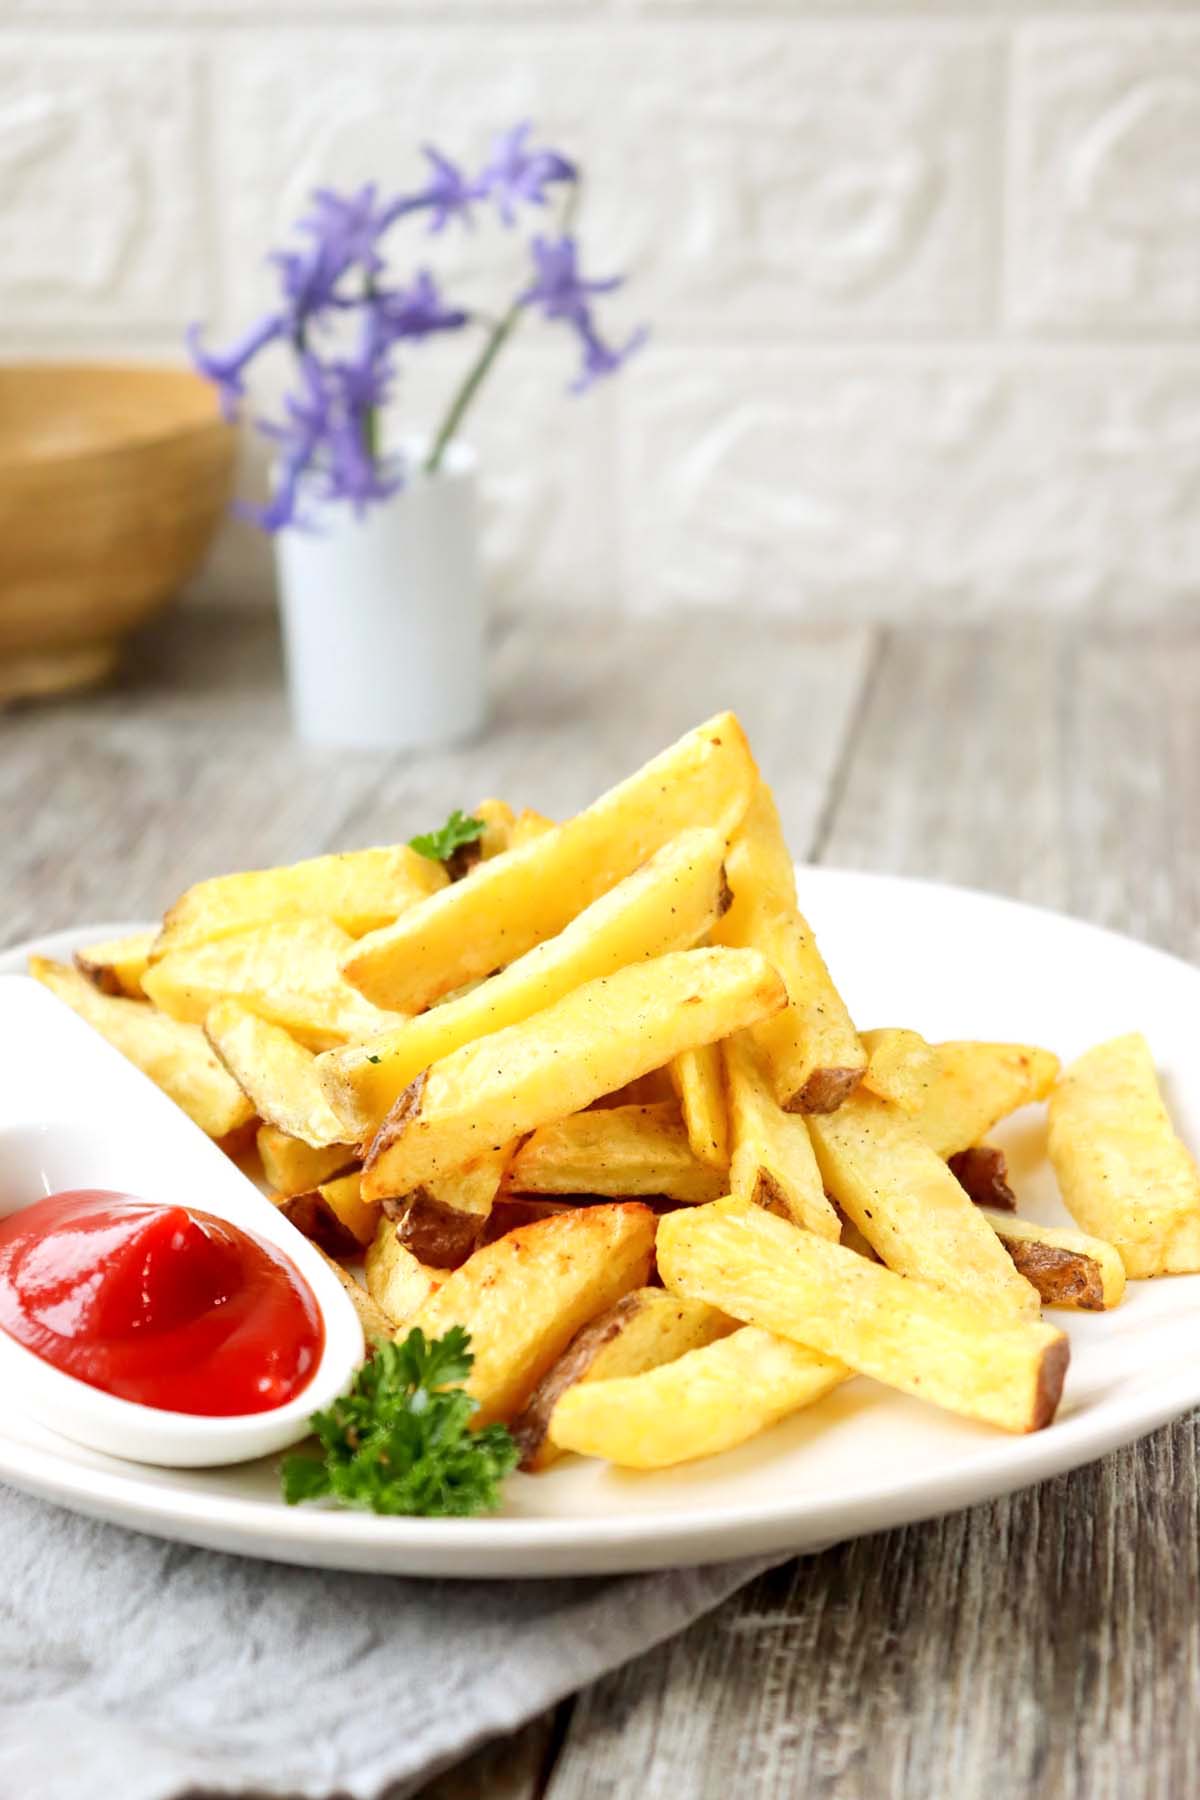 Fries on a plate set on a wood table.